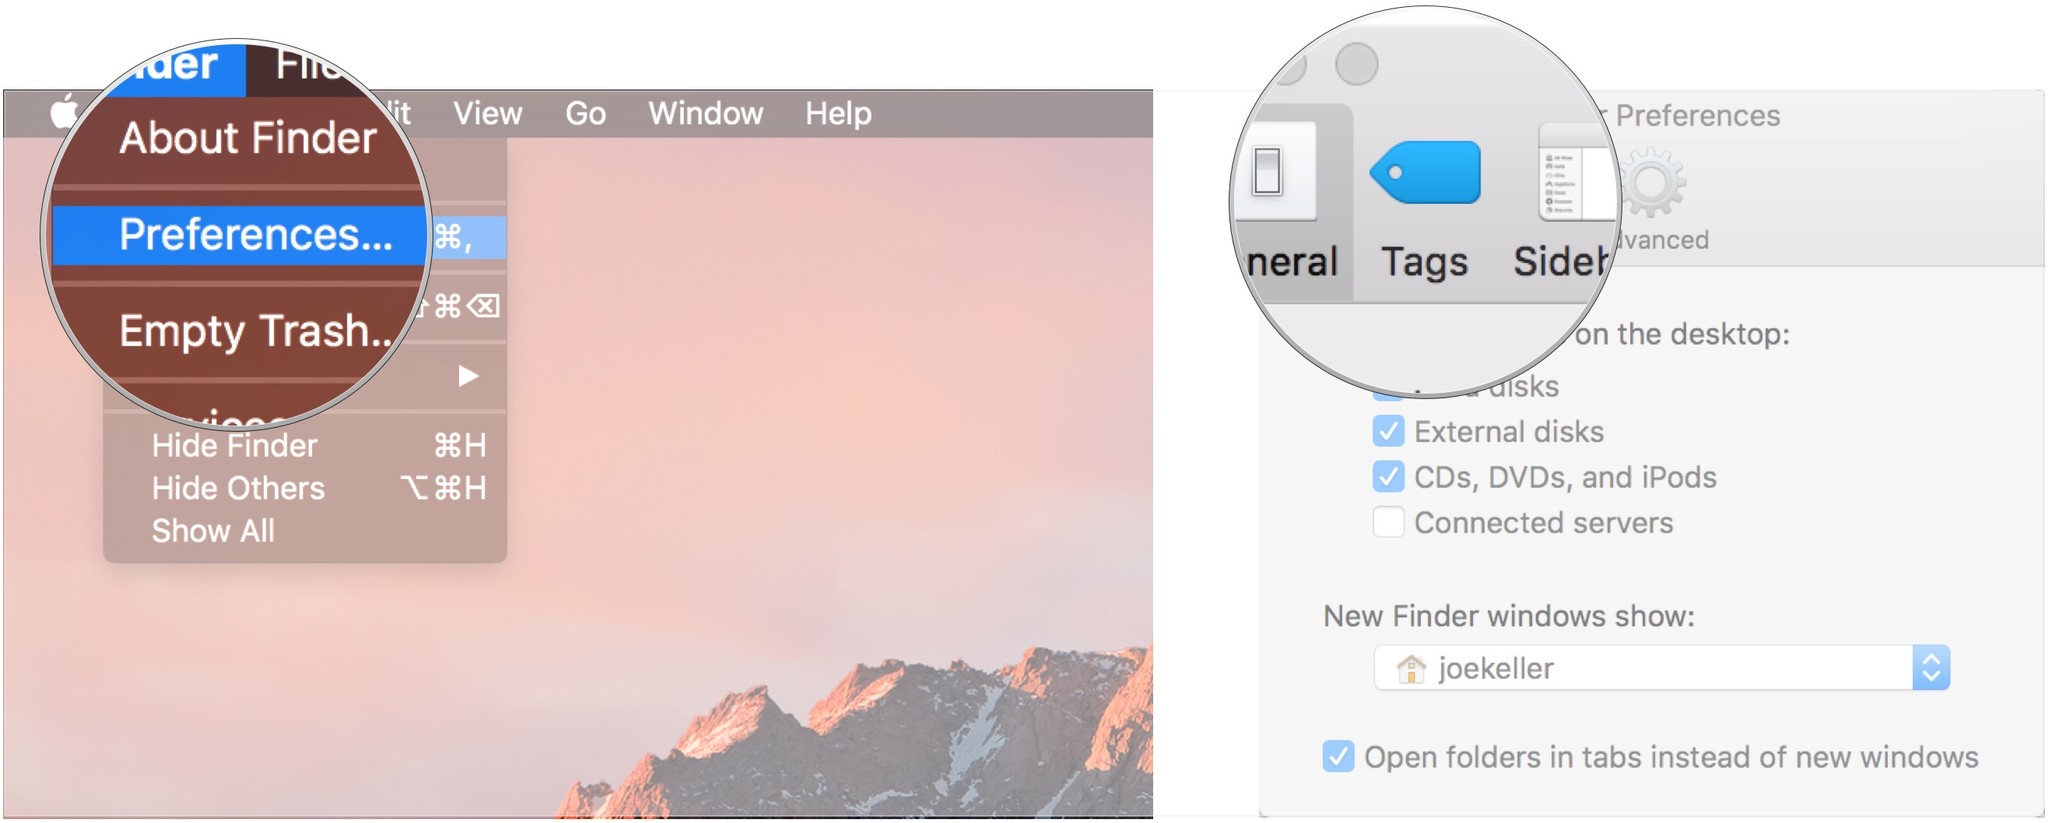 To use Tags, open Preferences, click Tags